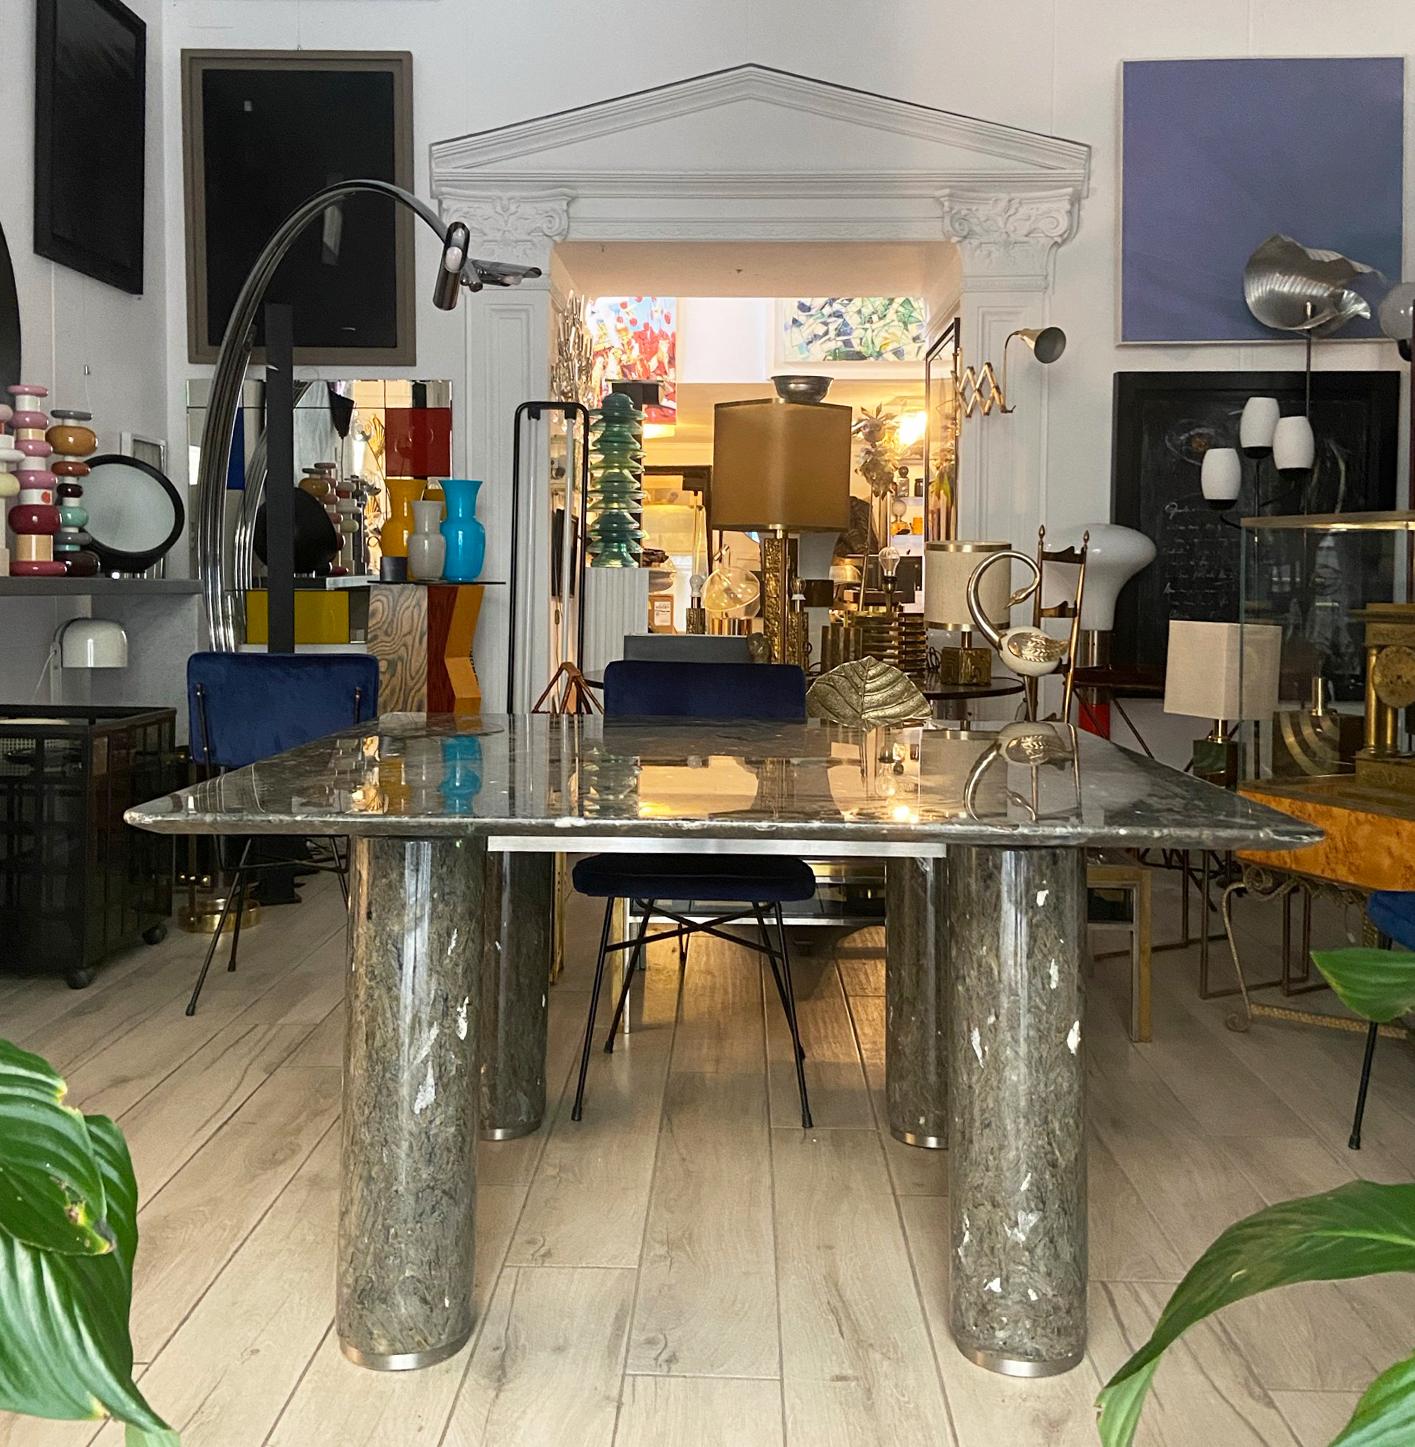 This beautiful dining table was designed in Italy in the 1970s. It is composed of a labradonite marble top resting on four cylindrical columns in solid marble.